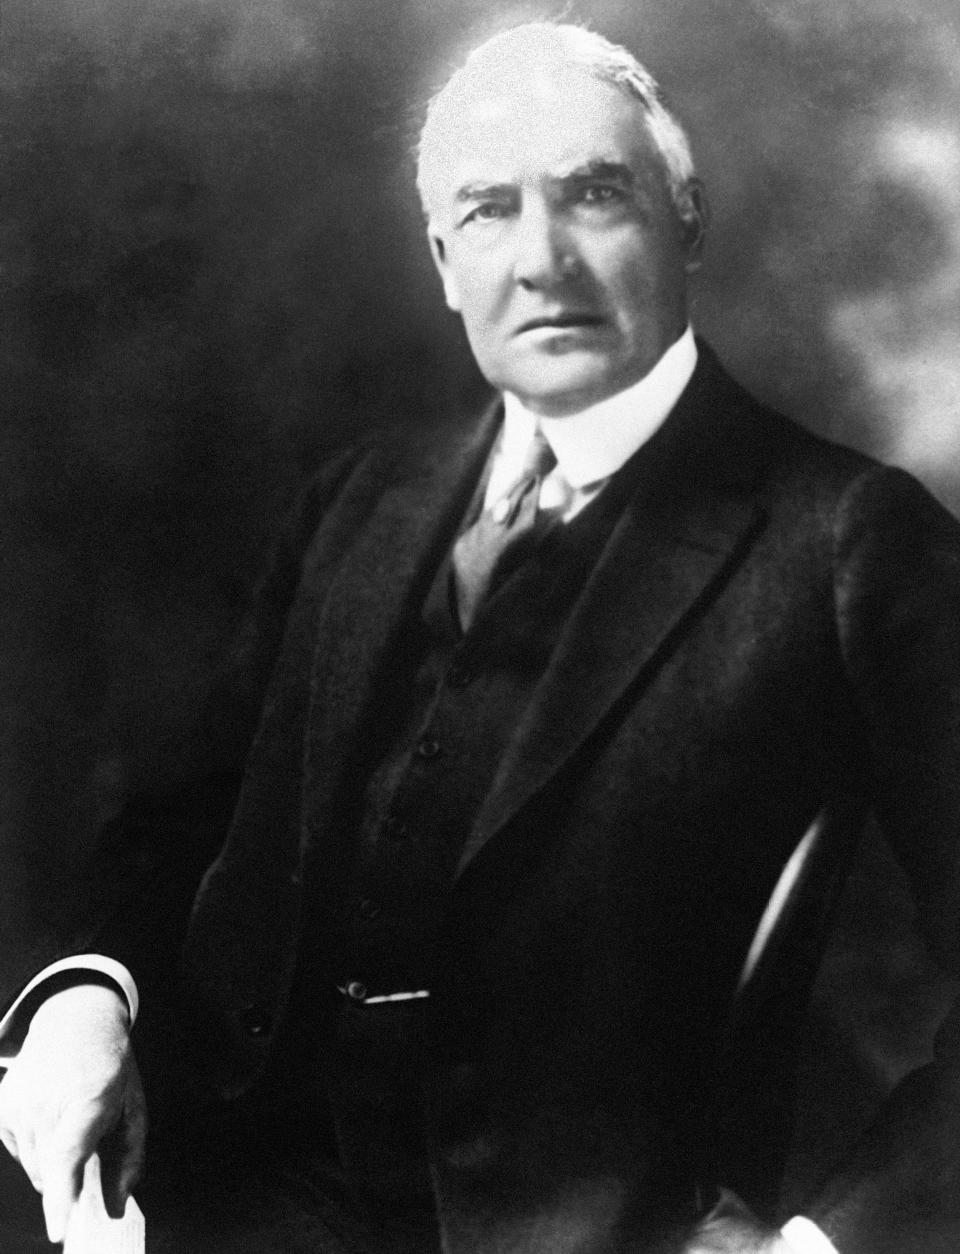 FILE - In this undated file photo, former President Warren G. Harding. Some historians wonder about Warren Harding's fate had he not died in office, in 1923: Numerous officials around him would be implicated in various wrongdoings, including Interior Secretary Albert Fall, whose corrupt land dealings became known as the “Teapot Dome Scandal.” (AP Photo, File)